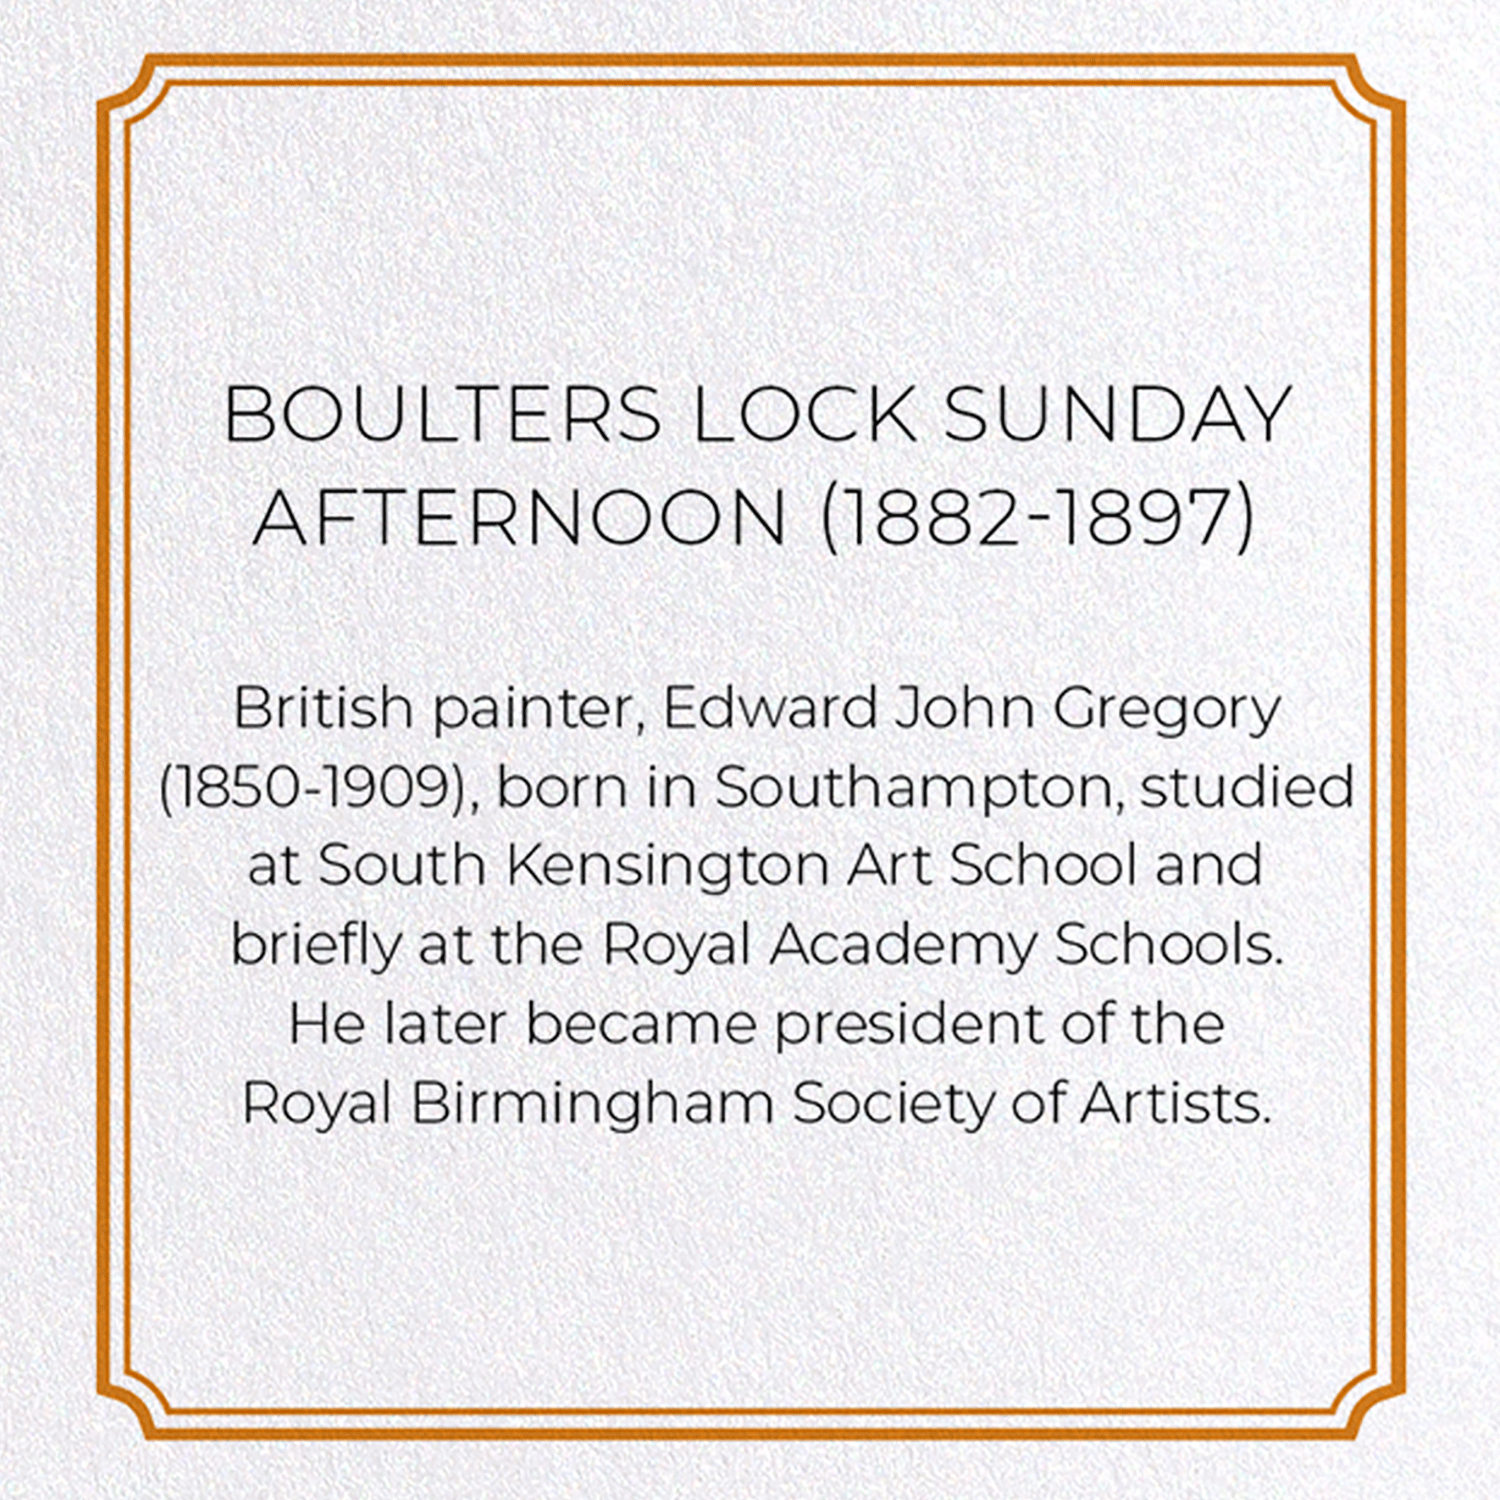 BOULTERS LOCK SUNDAY AFTERNOON (1882-1897)